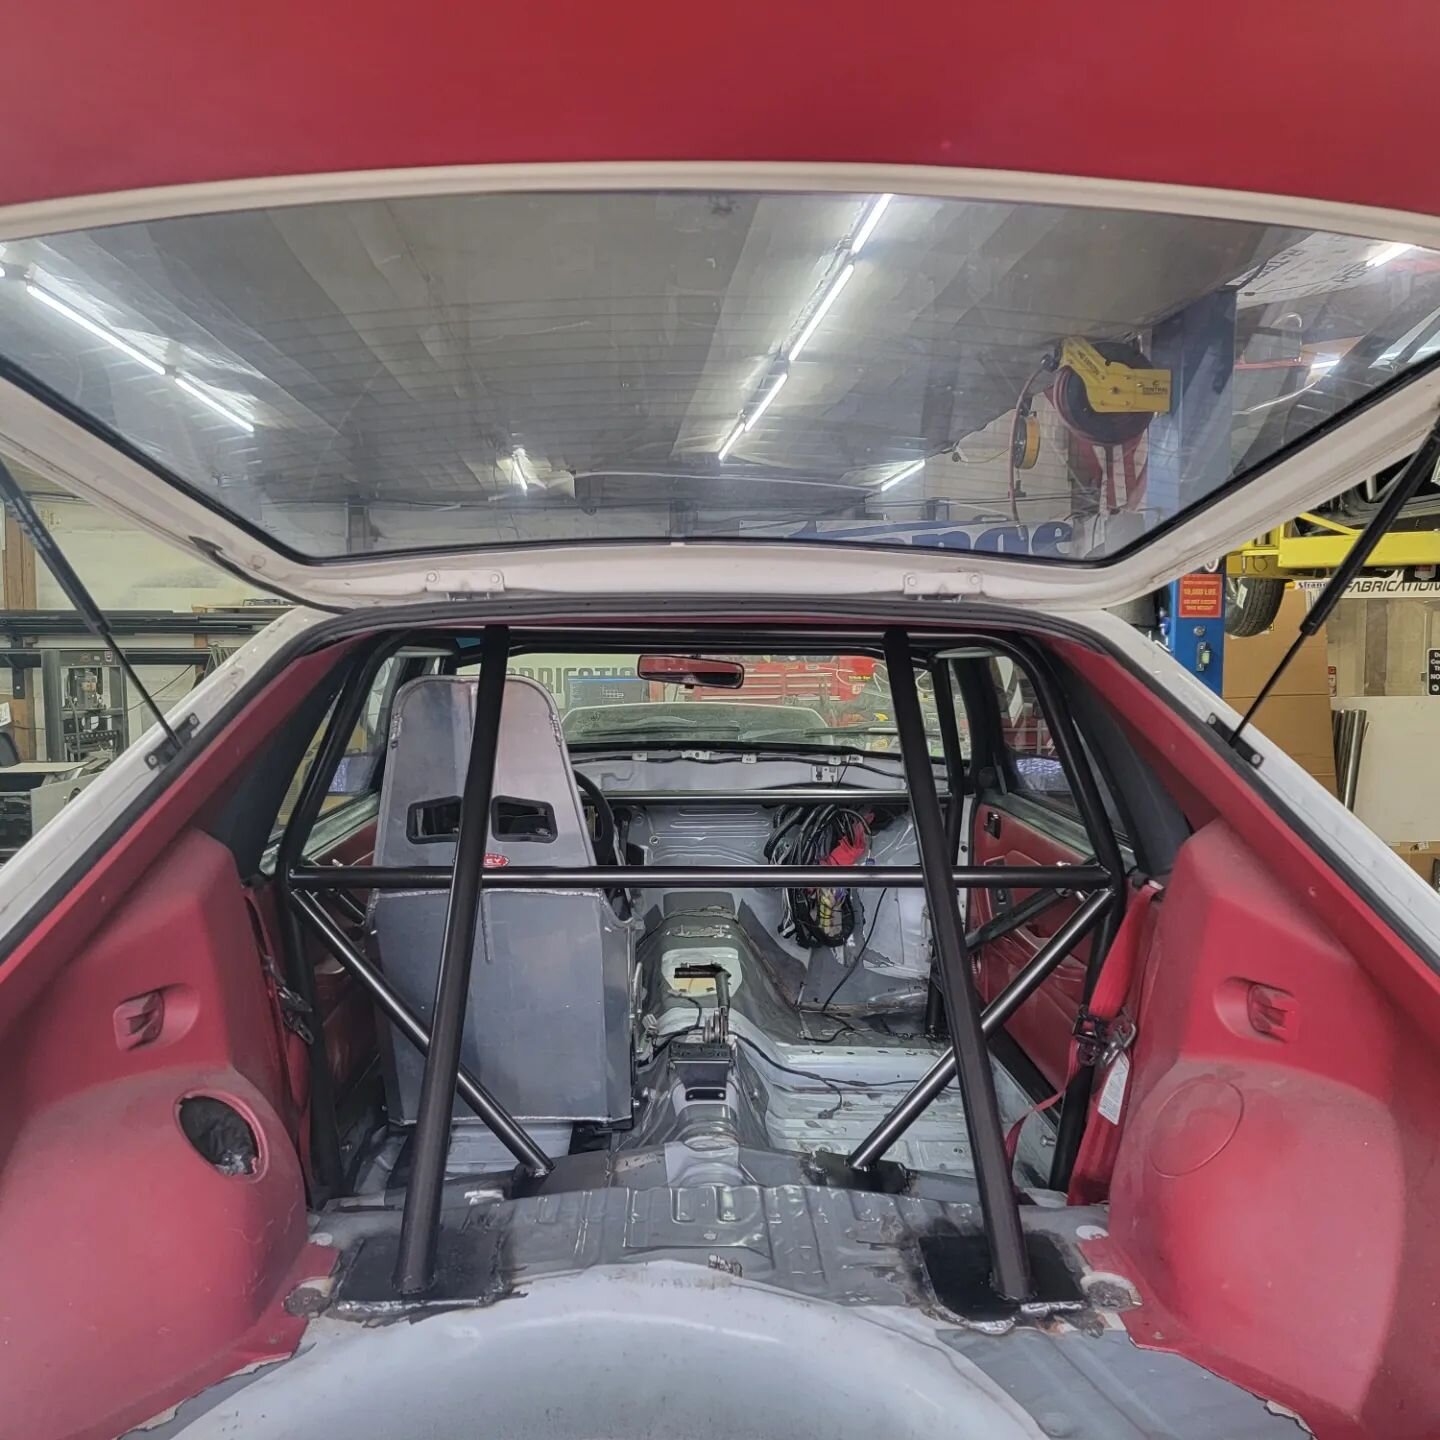 Another 8.50 cage built in 3 days. No need to miss any racing when you come to Warfighter Fabrication. #fabrication #racecar #mustang #foxbody #rollcage